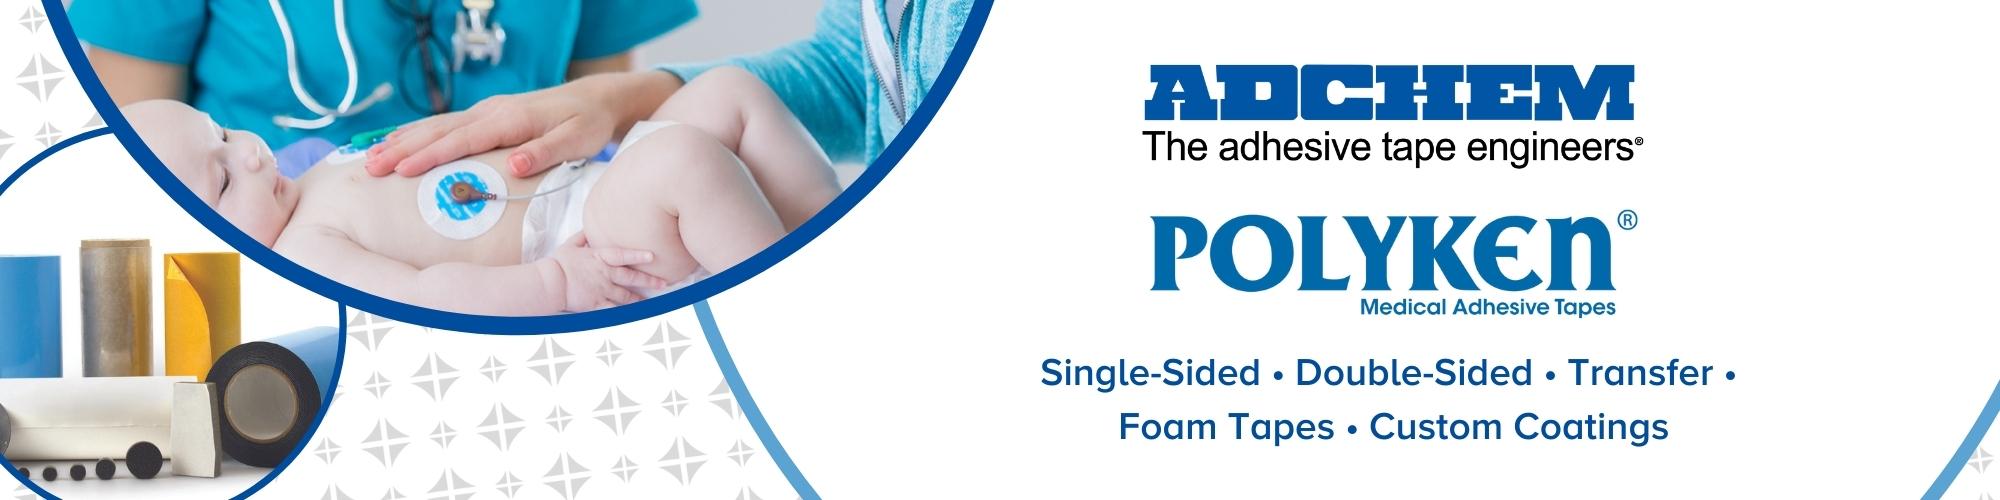 What Is Medical Adhesive Tape? - Converters, Inc.